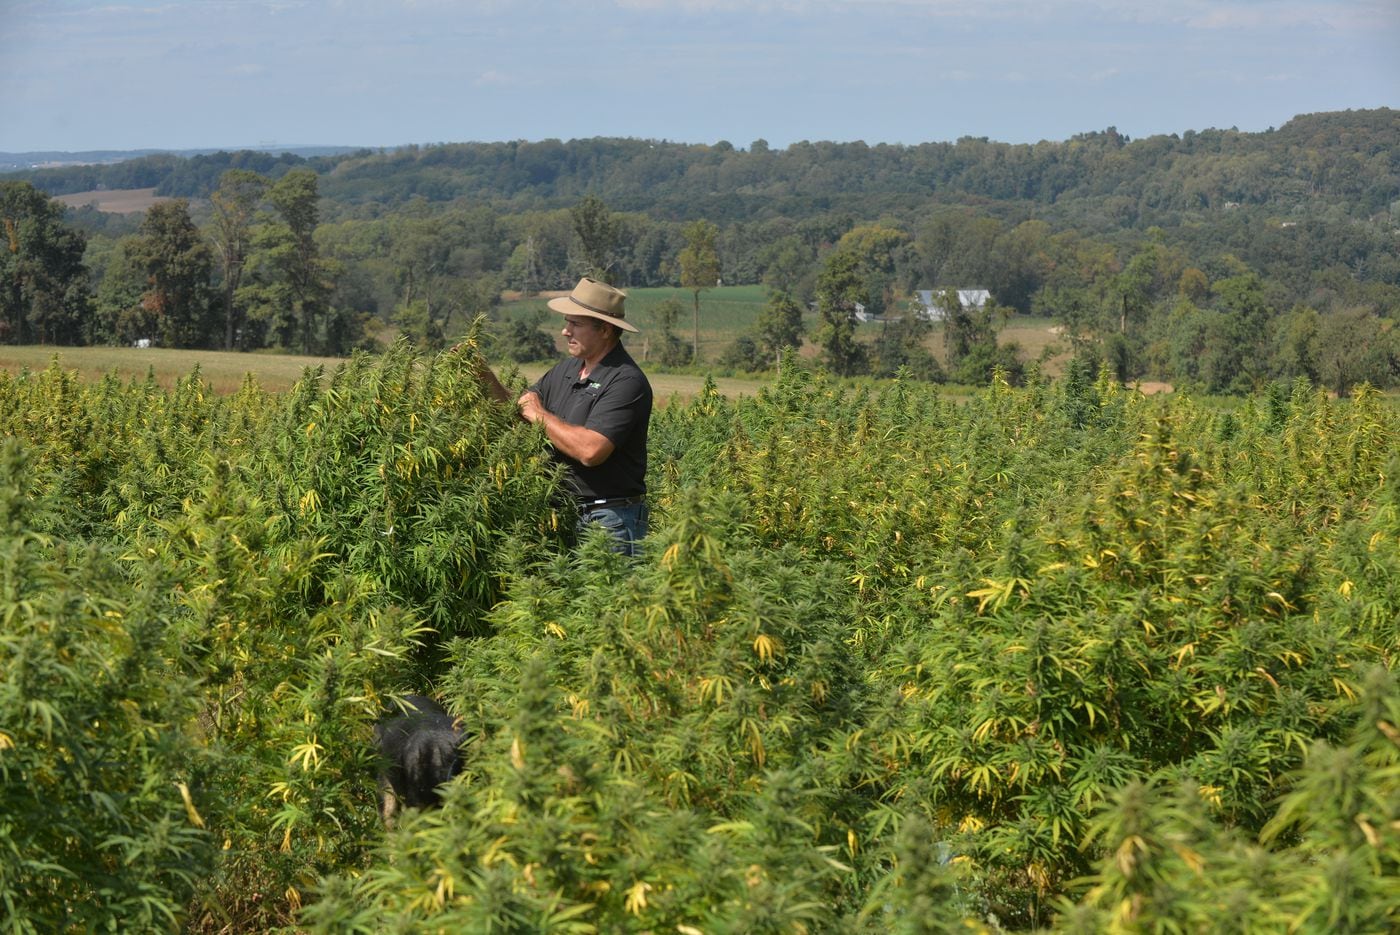 Steve Groff is getting ready to harvest his first crop of hemp plants at his farm in Holtwood, Lancaster County. Images from Sept. 23, 2019.